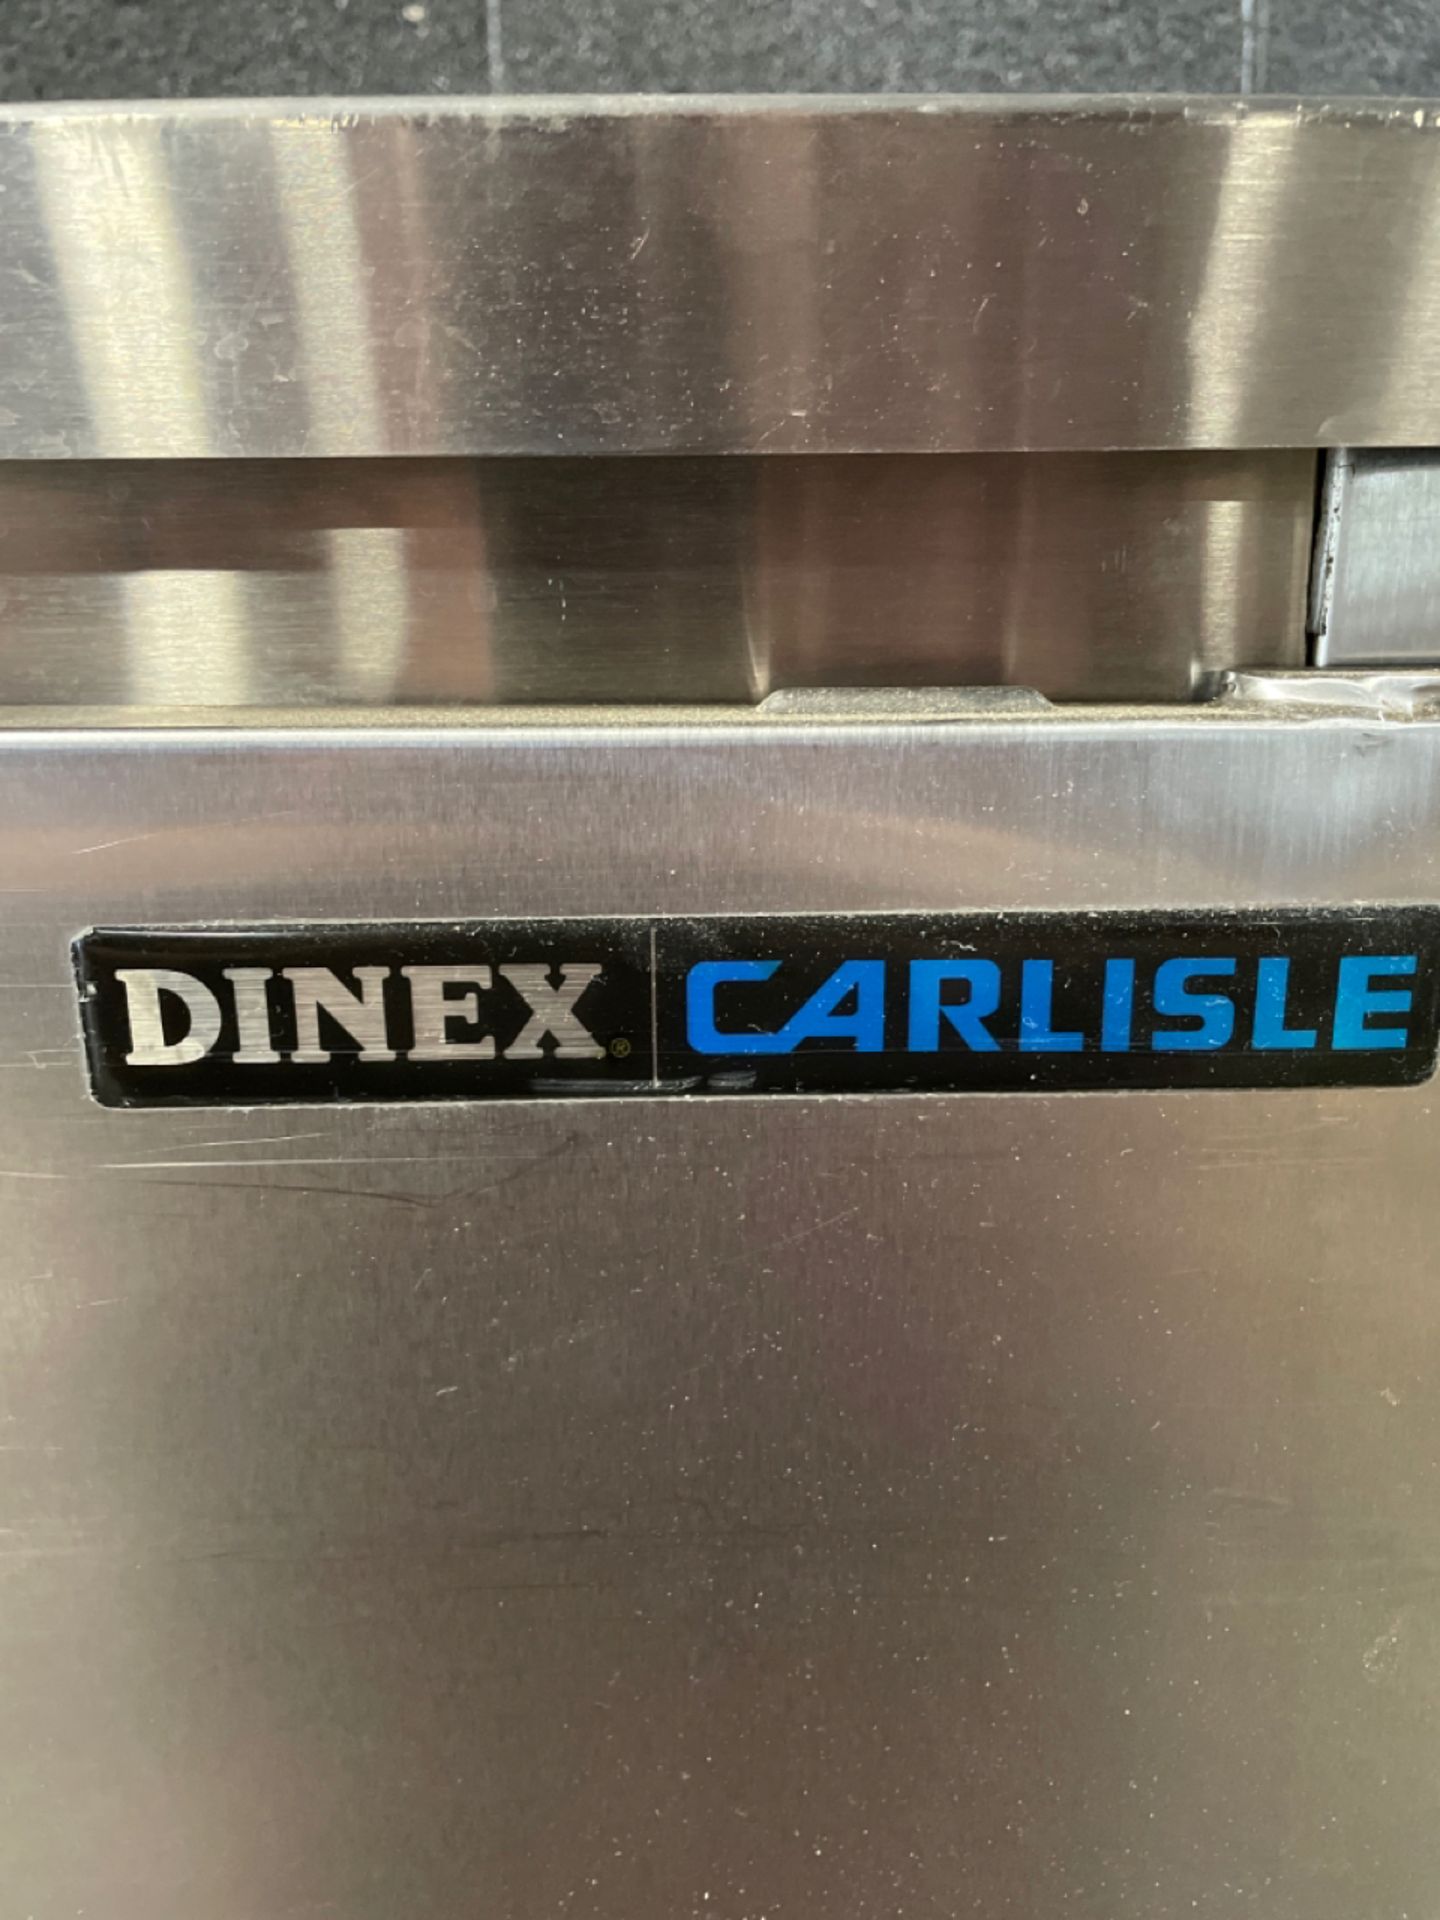 DINEX CARLISLE SS FOOD TRAY CART (LOCATED AT 151 REGAL ROW STE 231 DALLAS TX, 75247) - Image 4 of 6